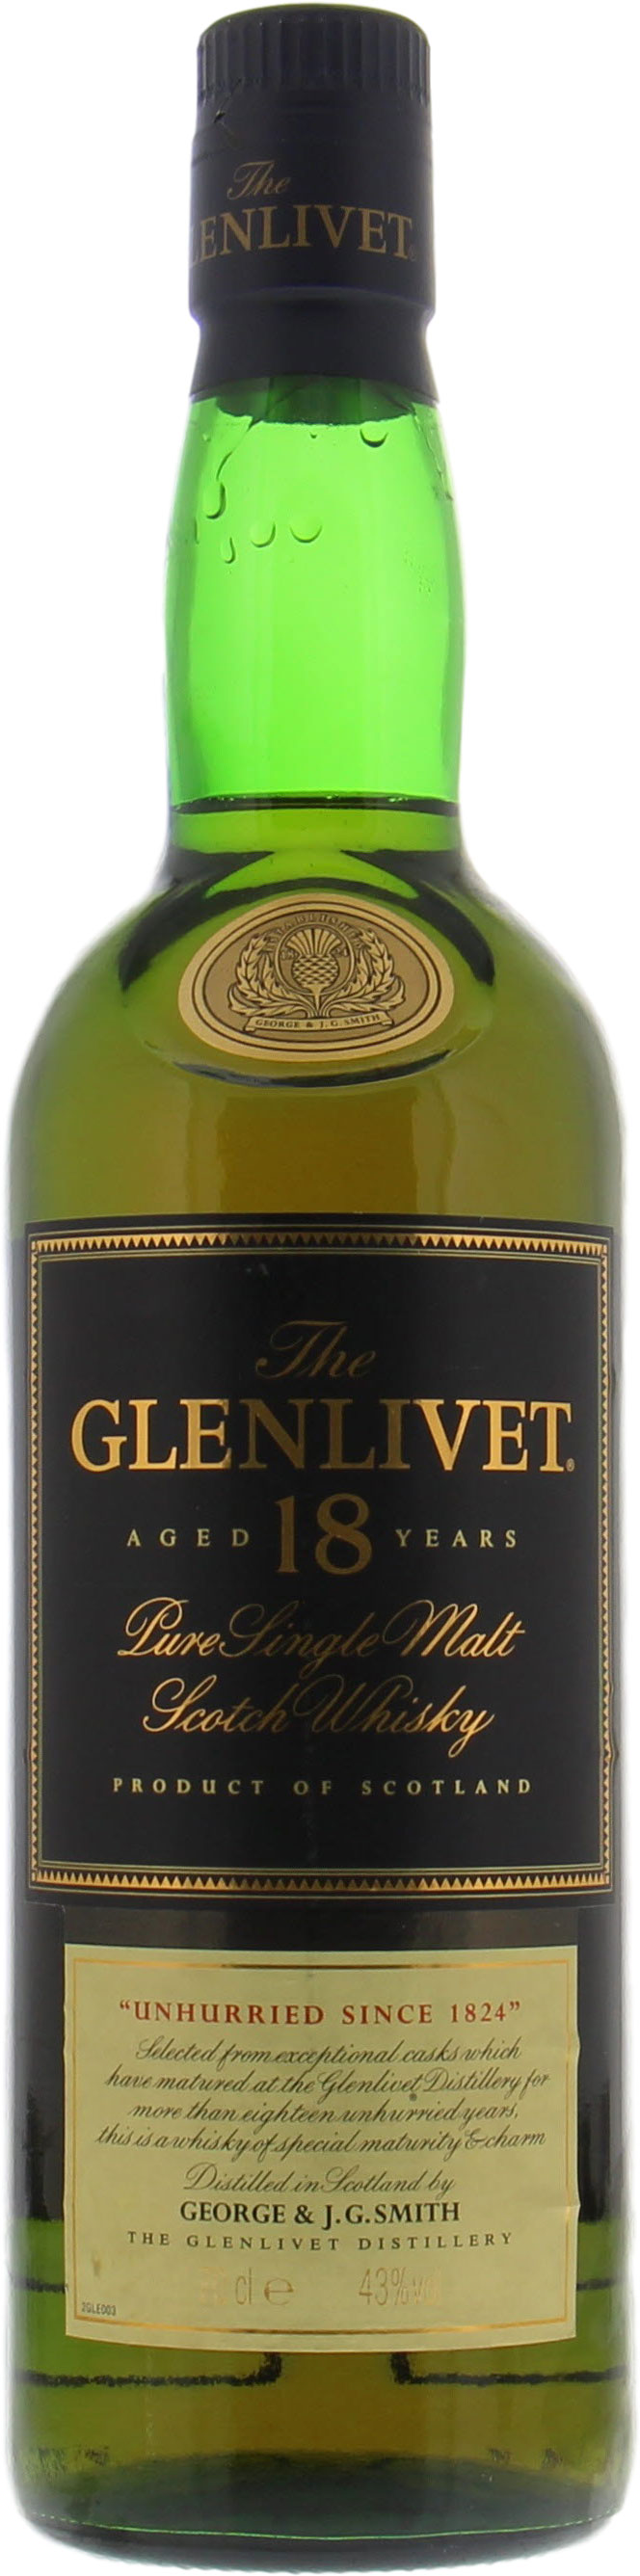 Glenlivet - 18 Years Old two-part label unhurried since 1824 43% NV In Original Container